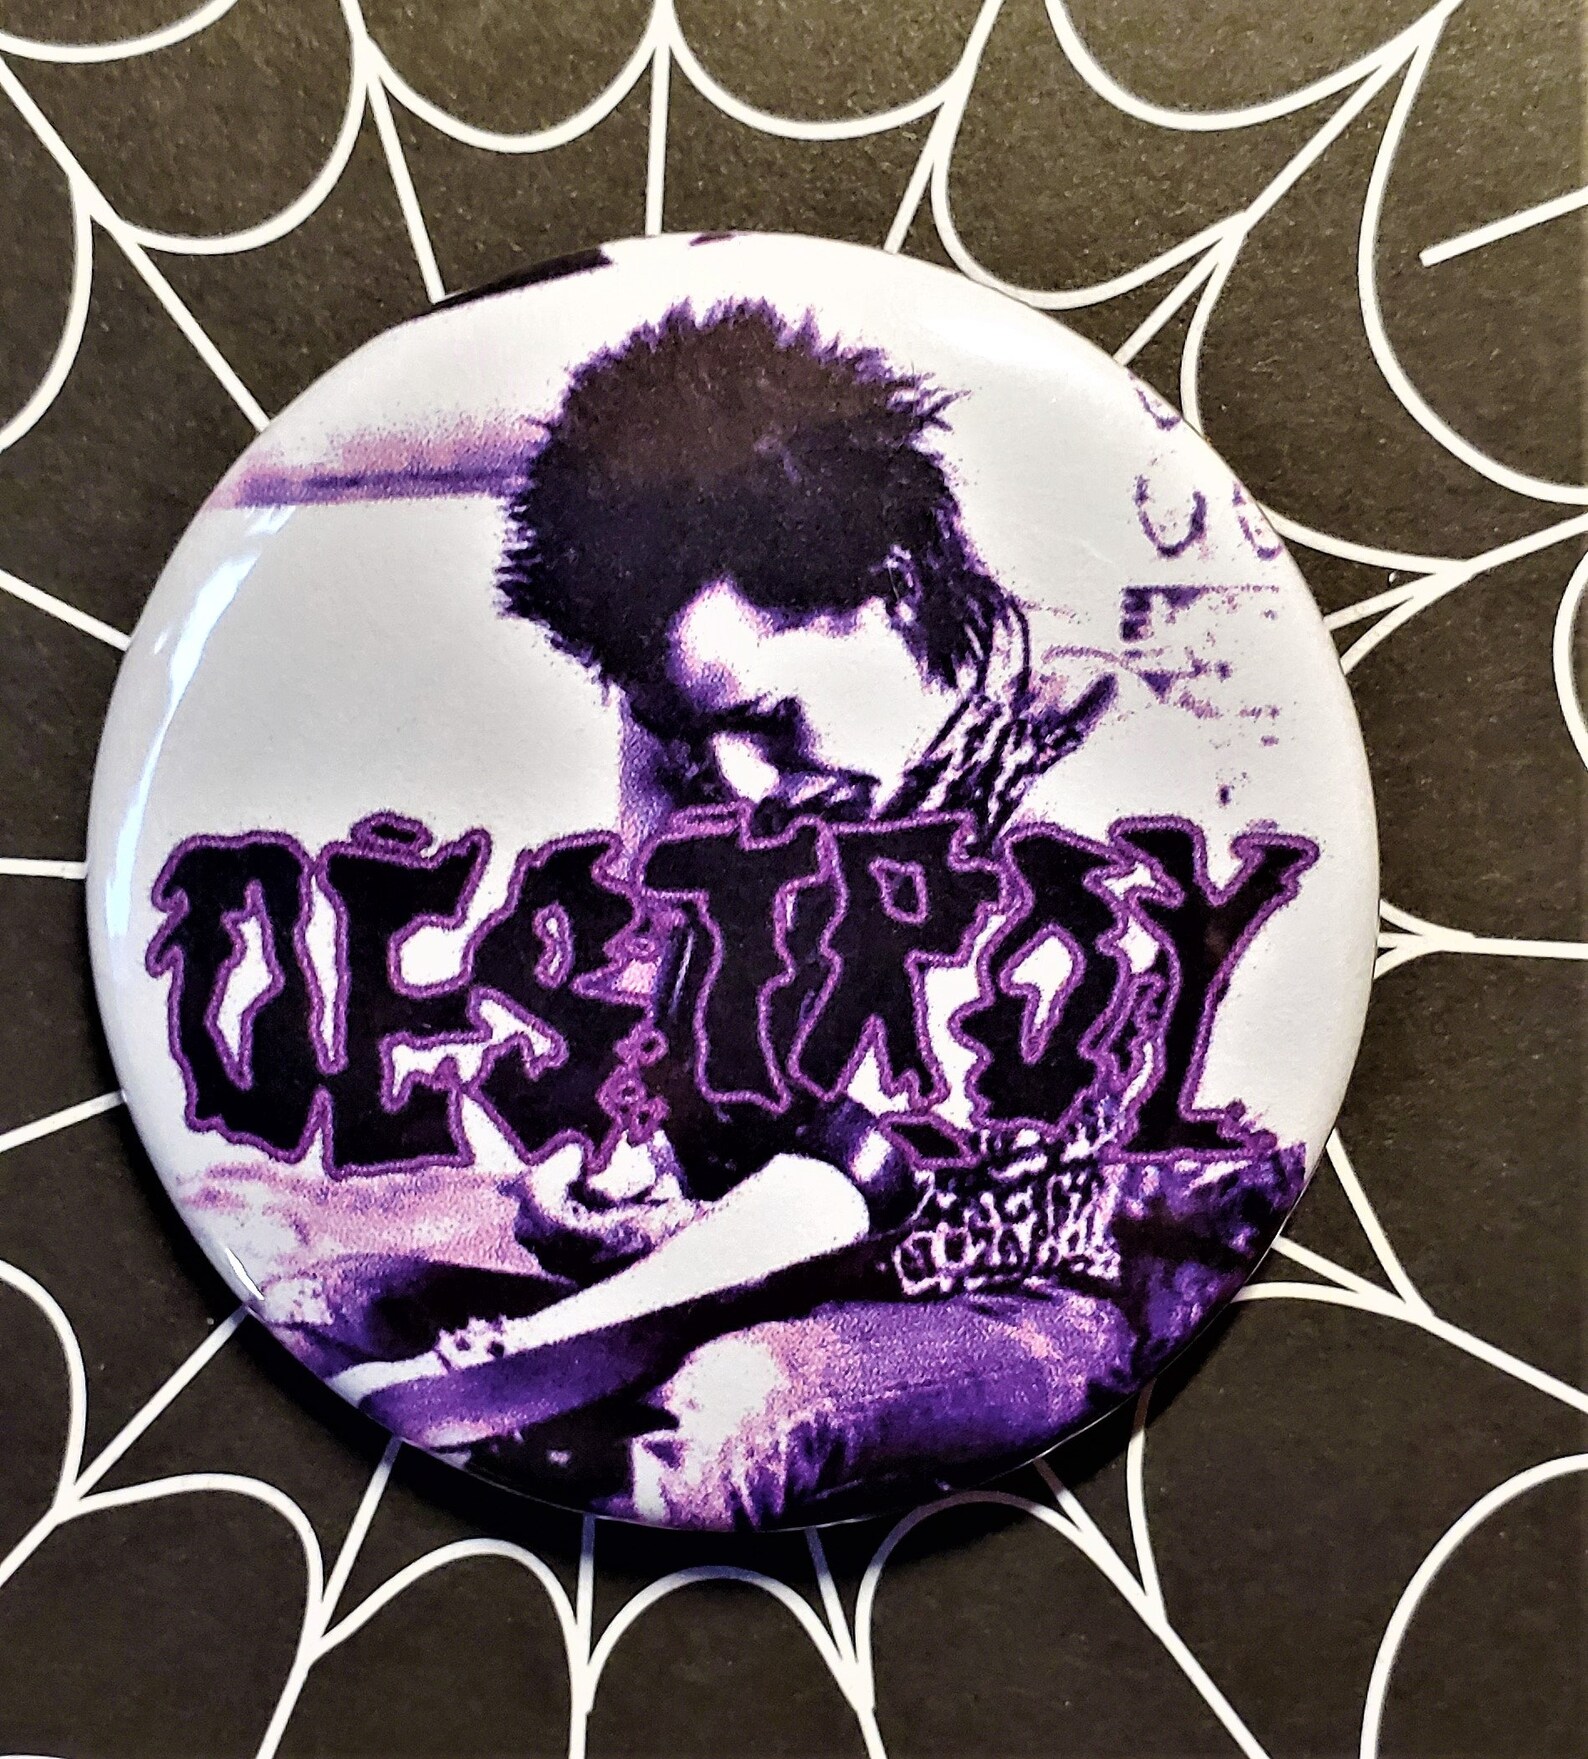 Sid Vicious 2 25 Pin Back Punk Rock Buttons Sex Pistols Etsy